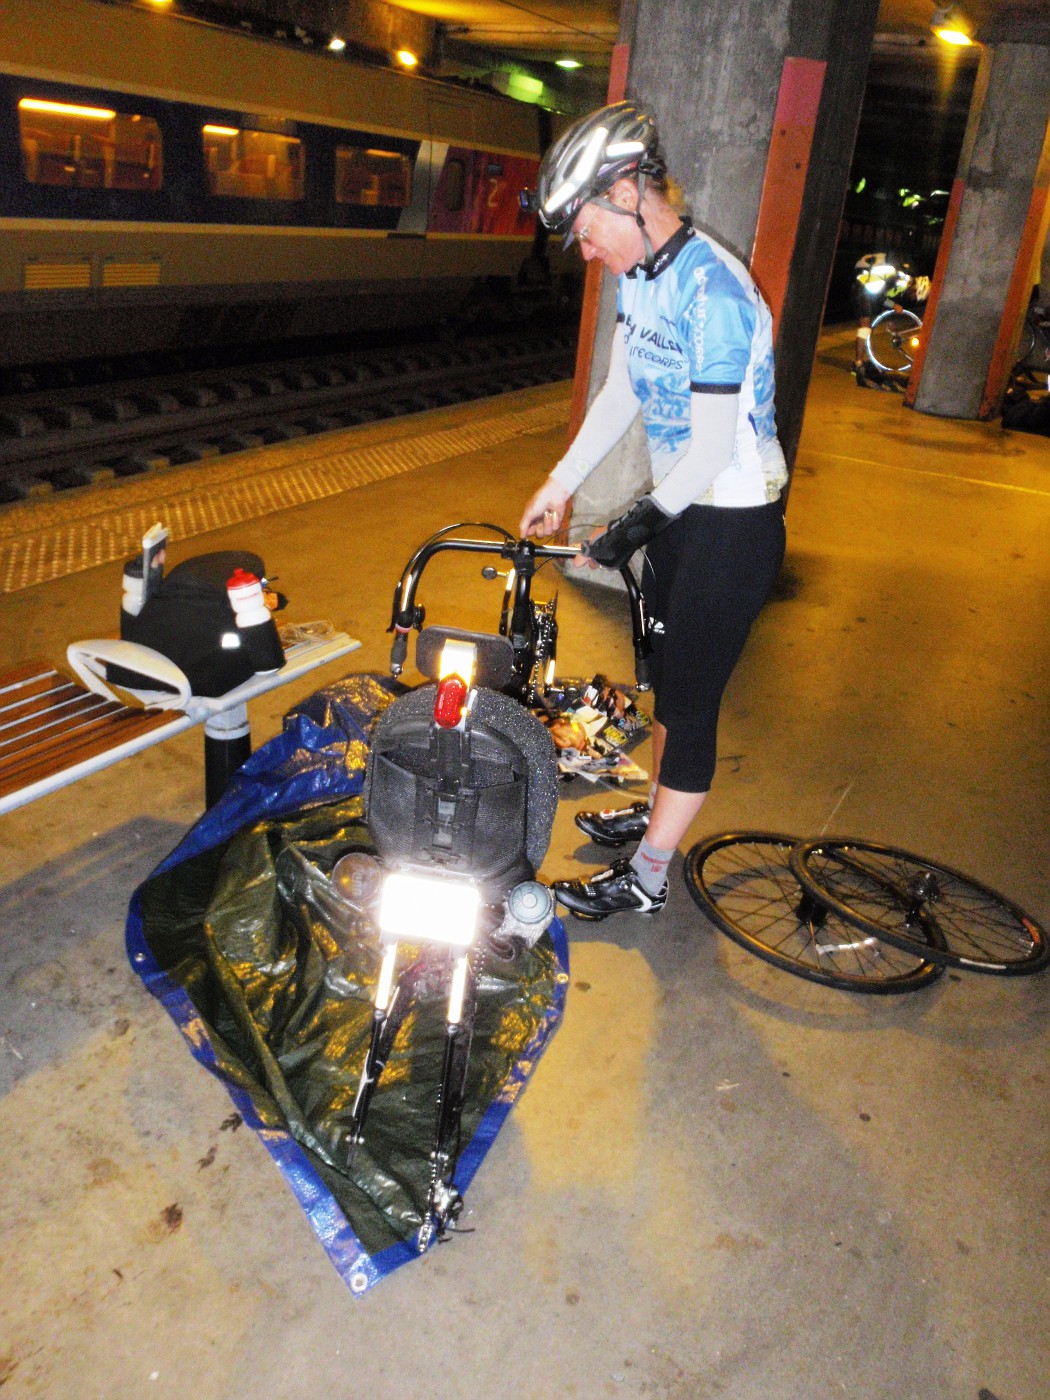 Vicky assembles her bike in Paris' railway-station